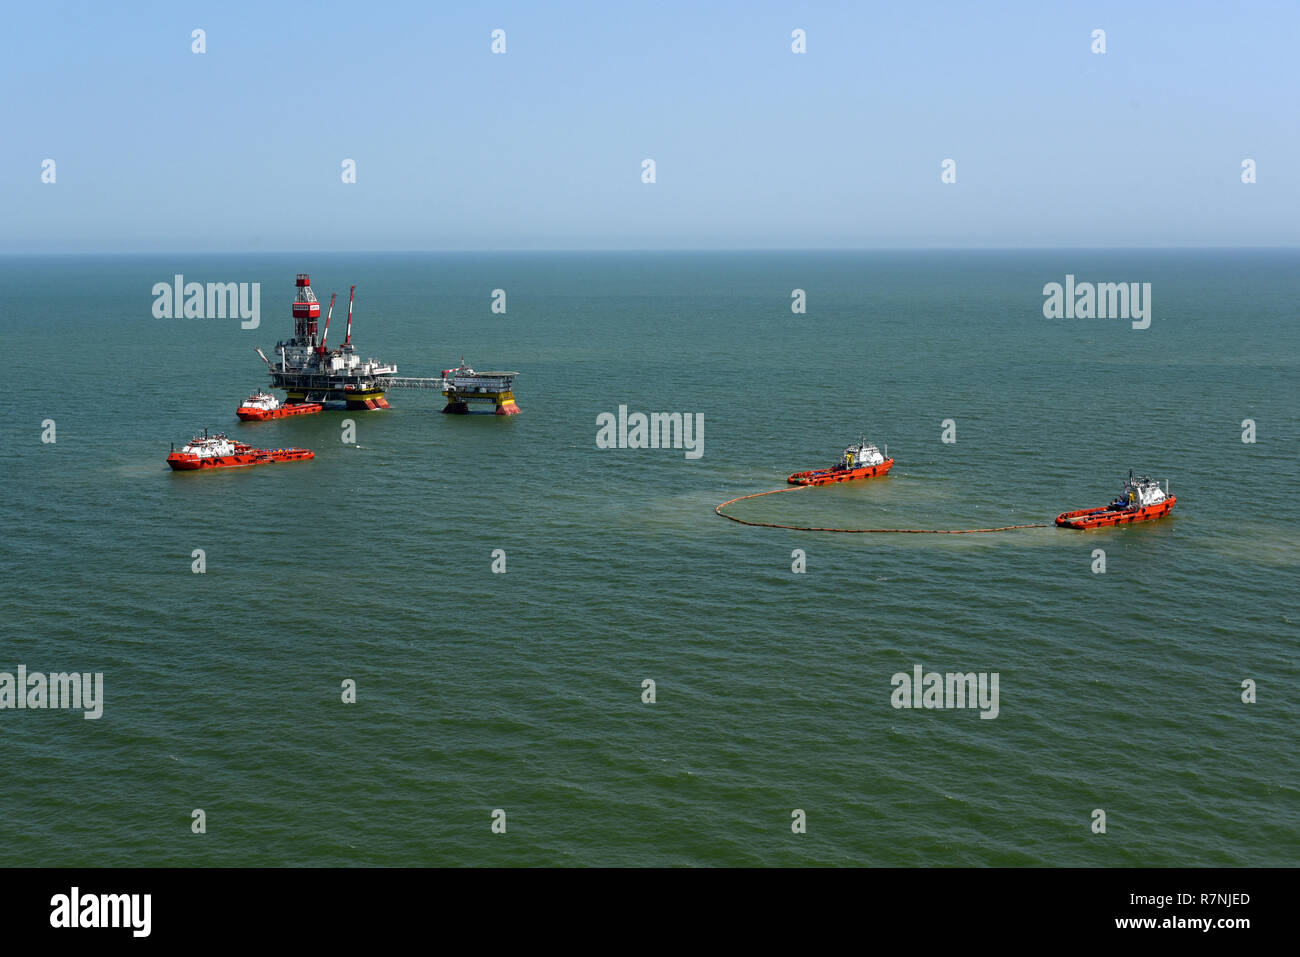 Rescue ships deploy a marine boom during the fire fighting training exercises on the oil rig Lukoil Filanovsky at the Caspian sea, Russia. Stock Photo